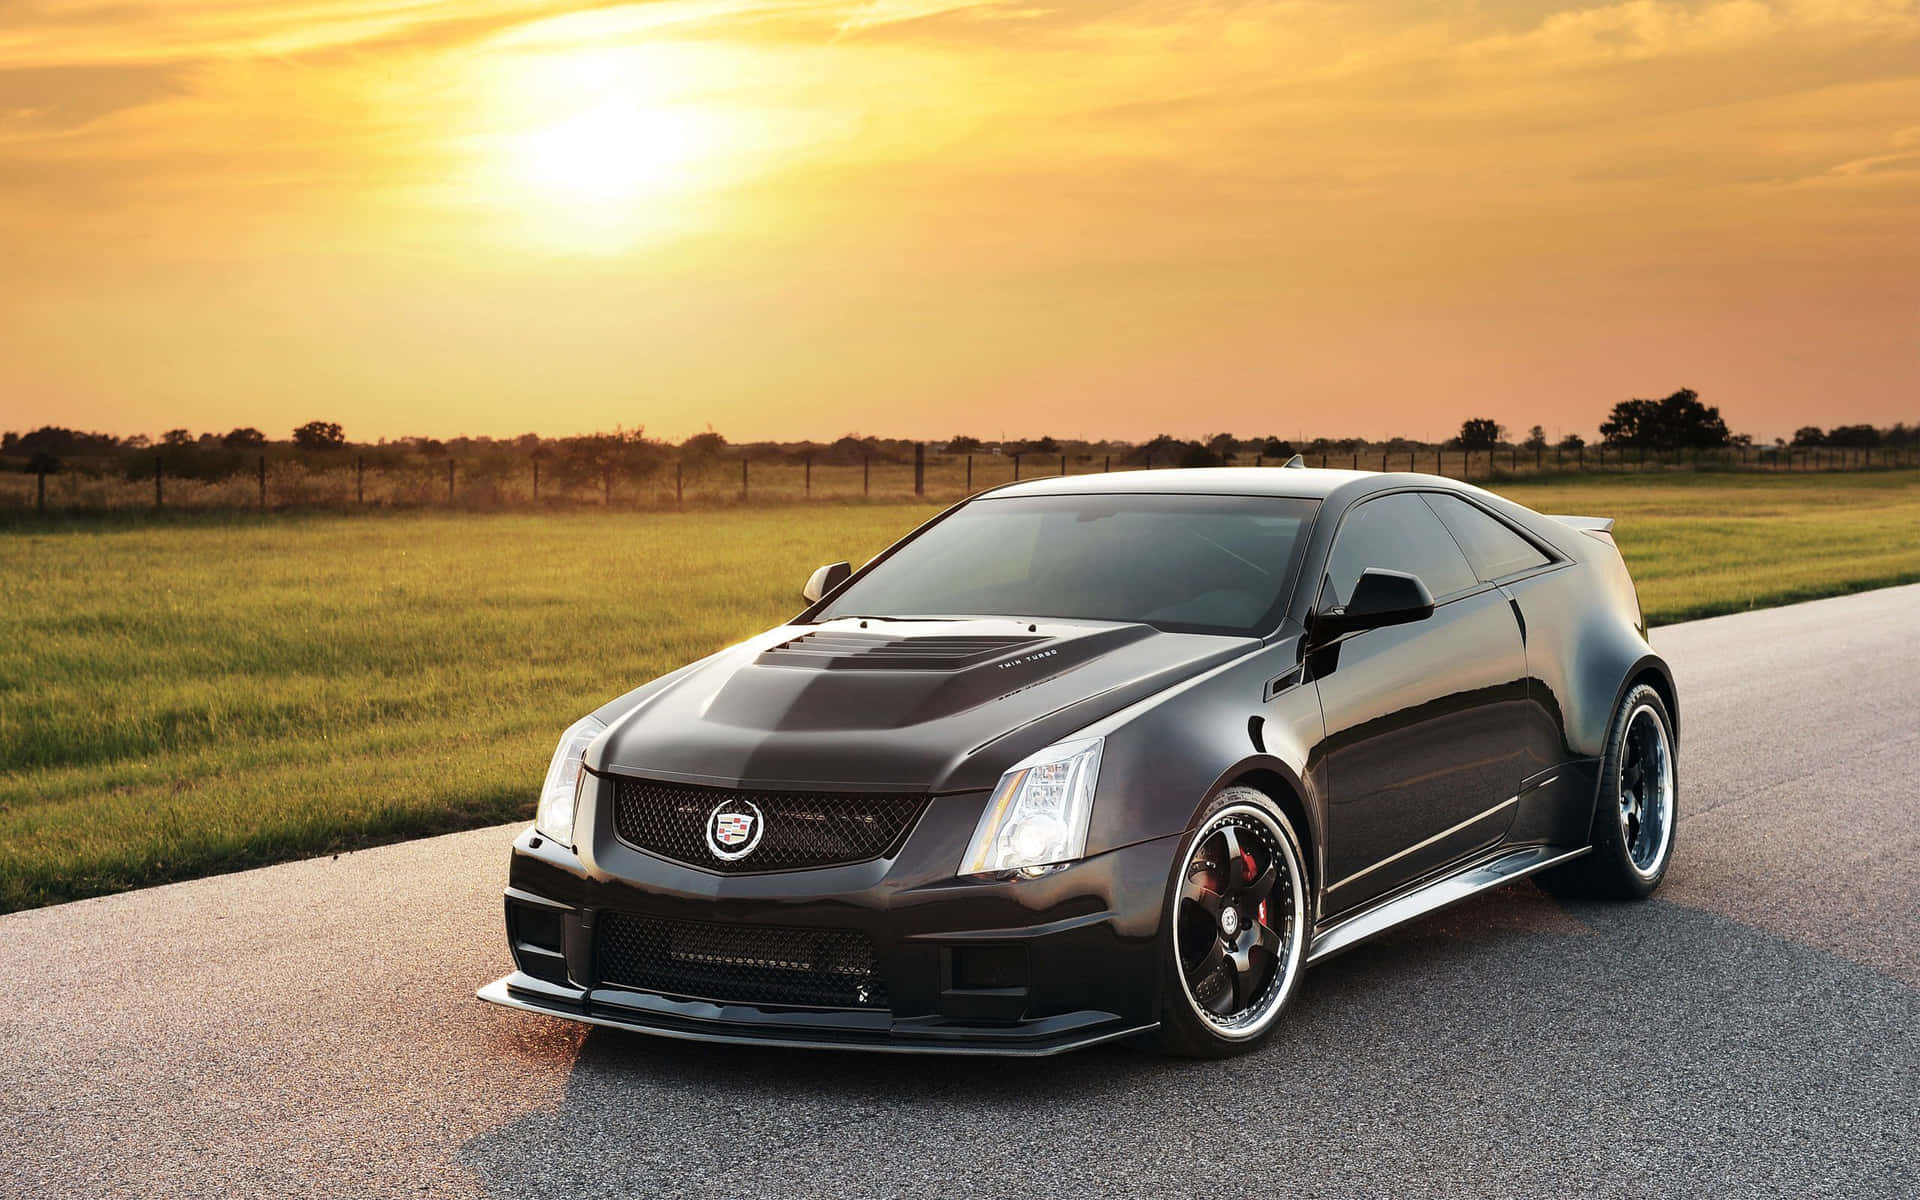 Stunning Cadillac CTS in motion. Wallpaper